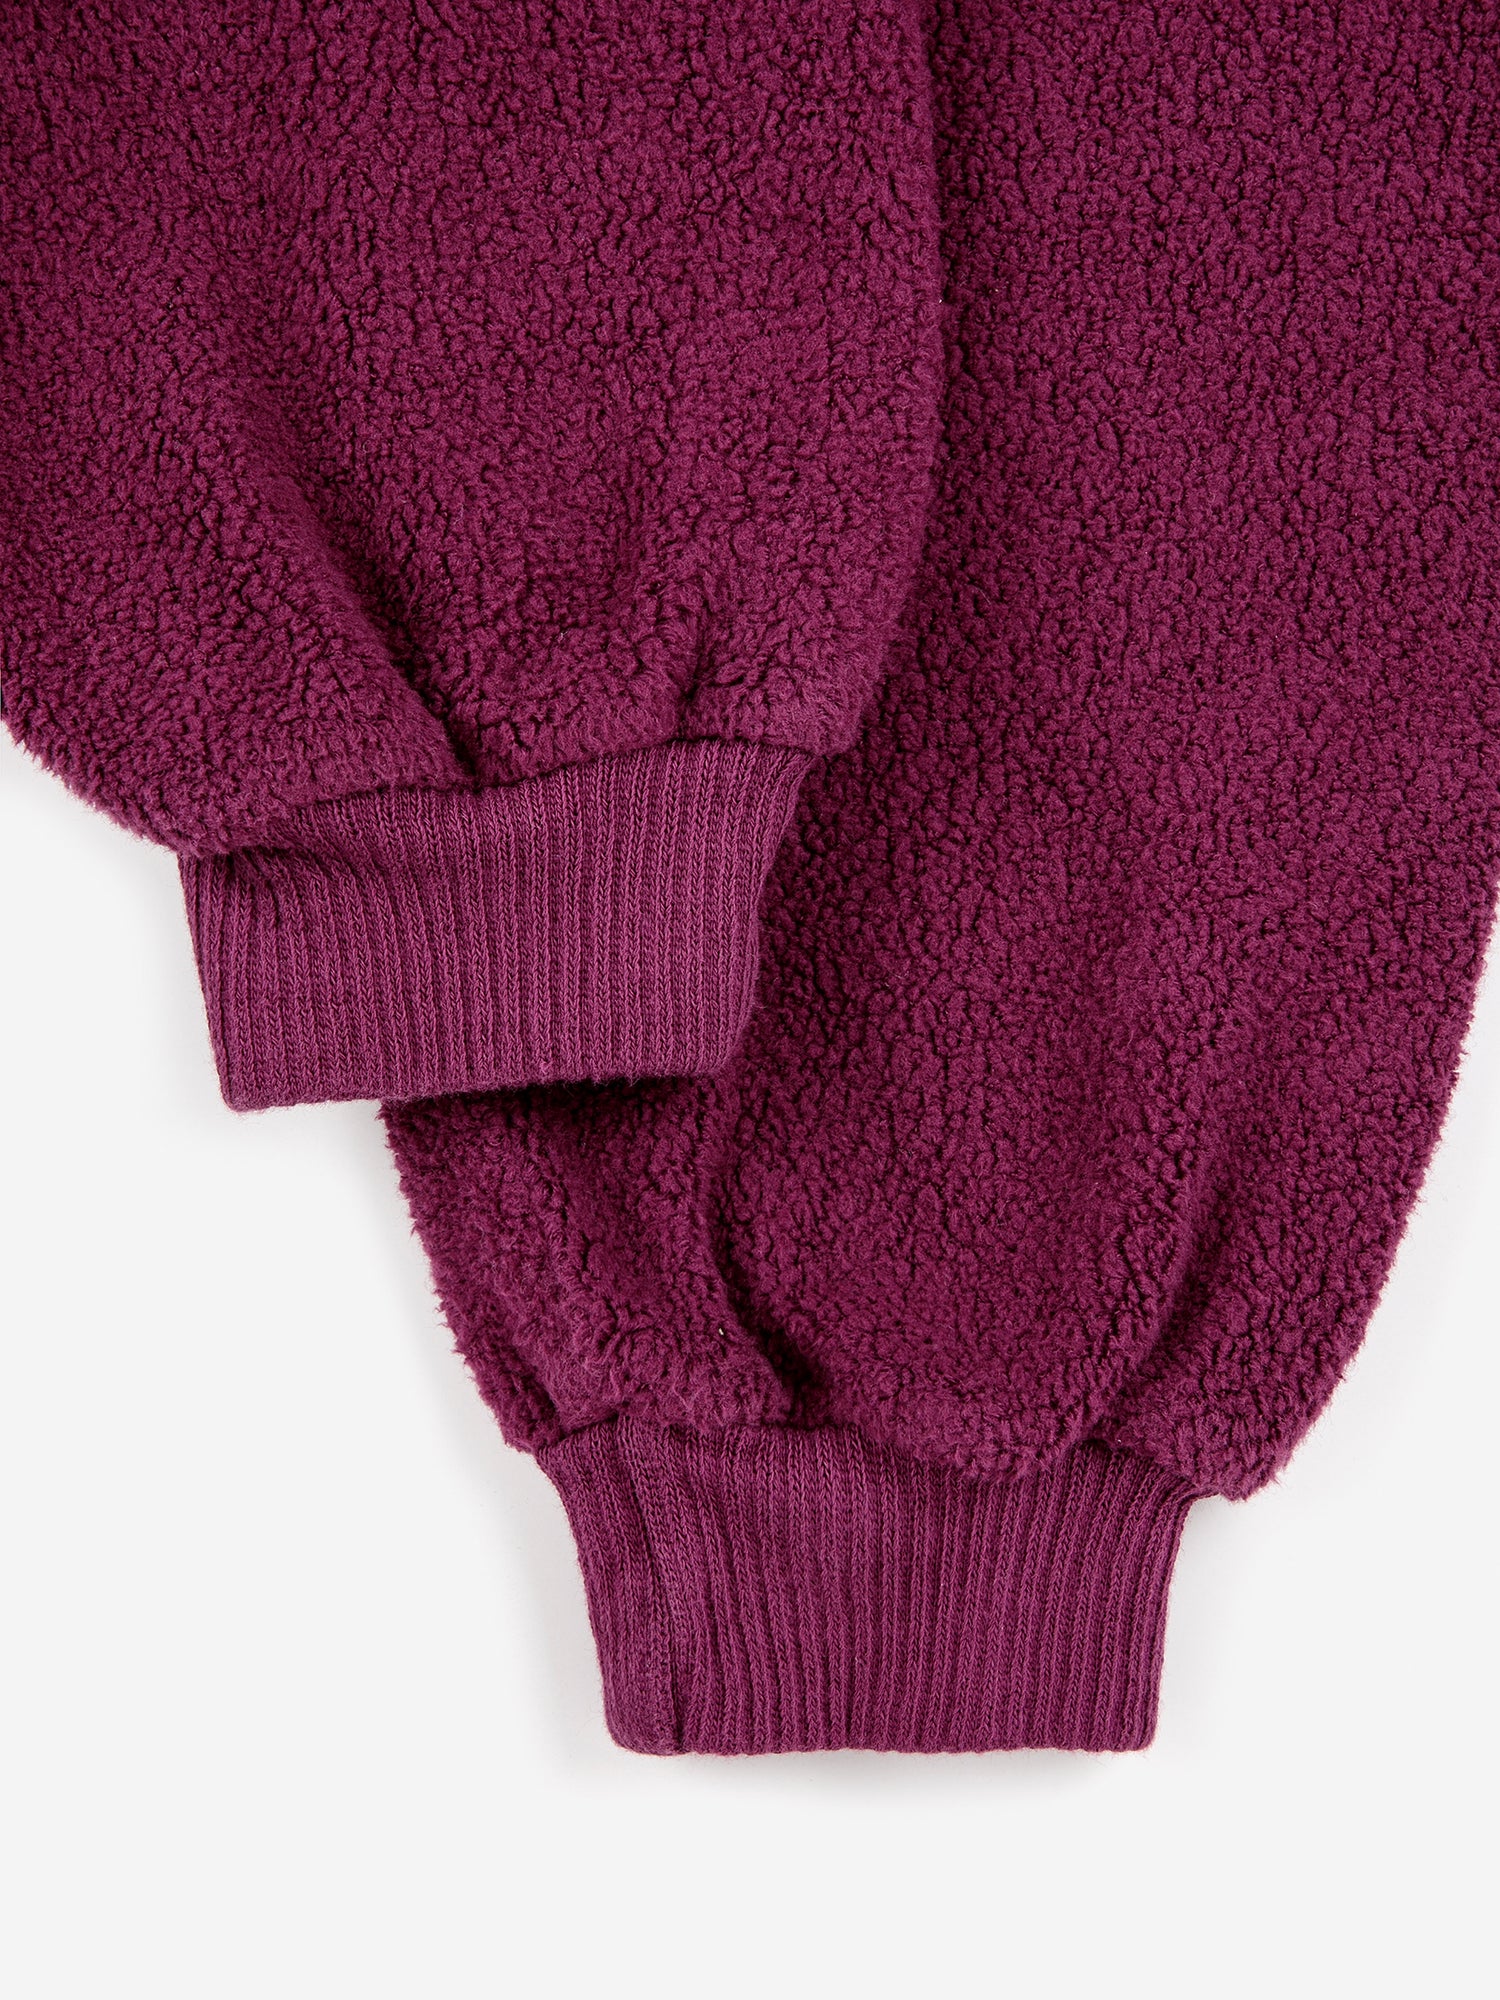 B.C. Label Sweatshirt by Bobo Choses. 100% organic cotton purple fleece sweatshirt. Designed with balloon sleeves, dropped shoulder, ribbed mock neck & hems, and a half zipper. It has a loose fit.  Made ethically and sustainably in Portugal for Bobo Choses.